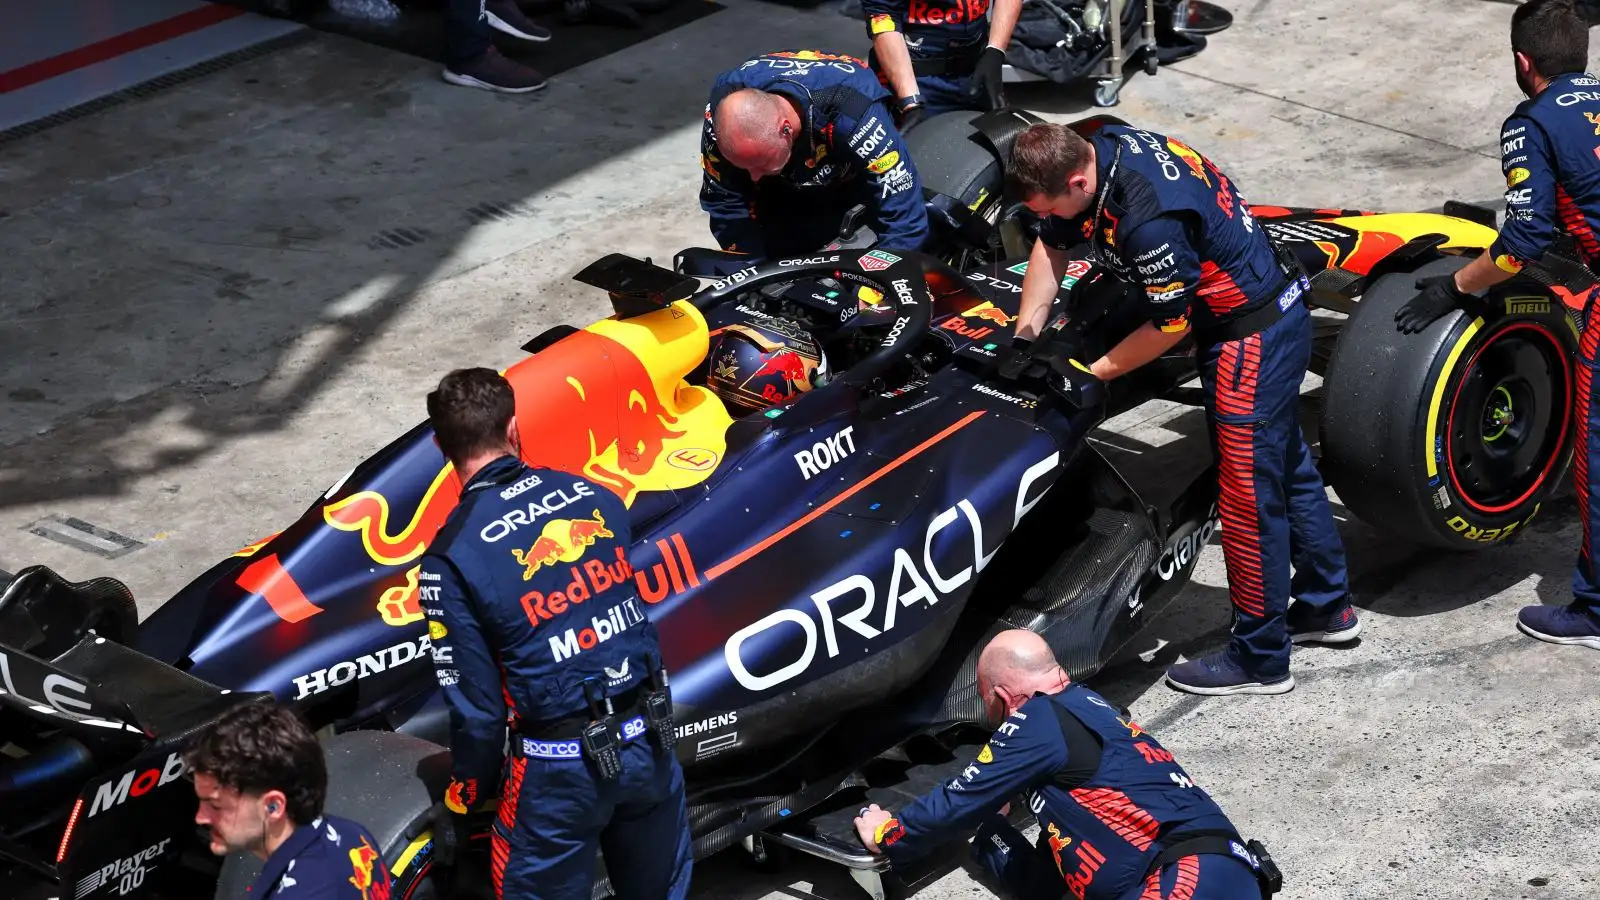 Red Bull mechanics apply the finishing touches to Max Verstappen's Red Bull car in São Paulo.